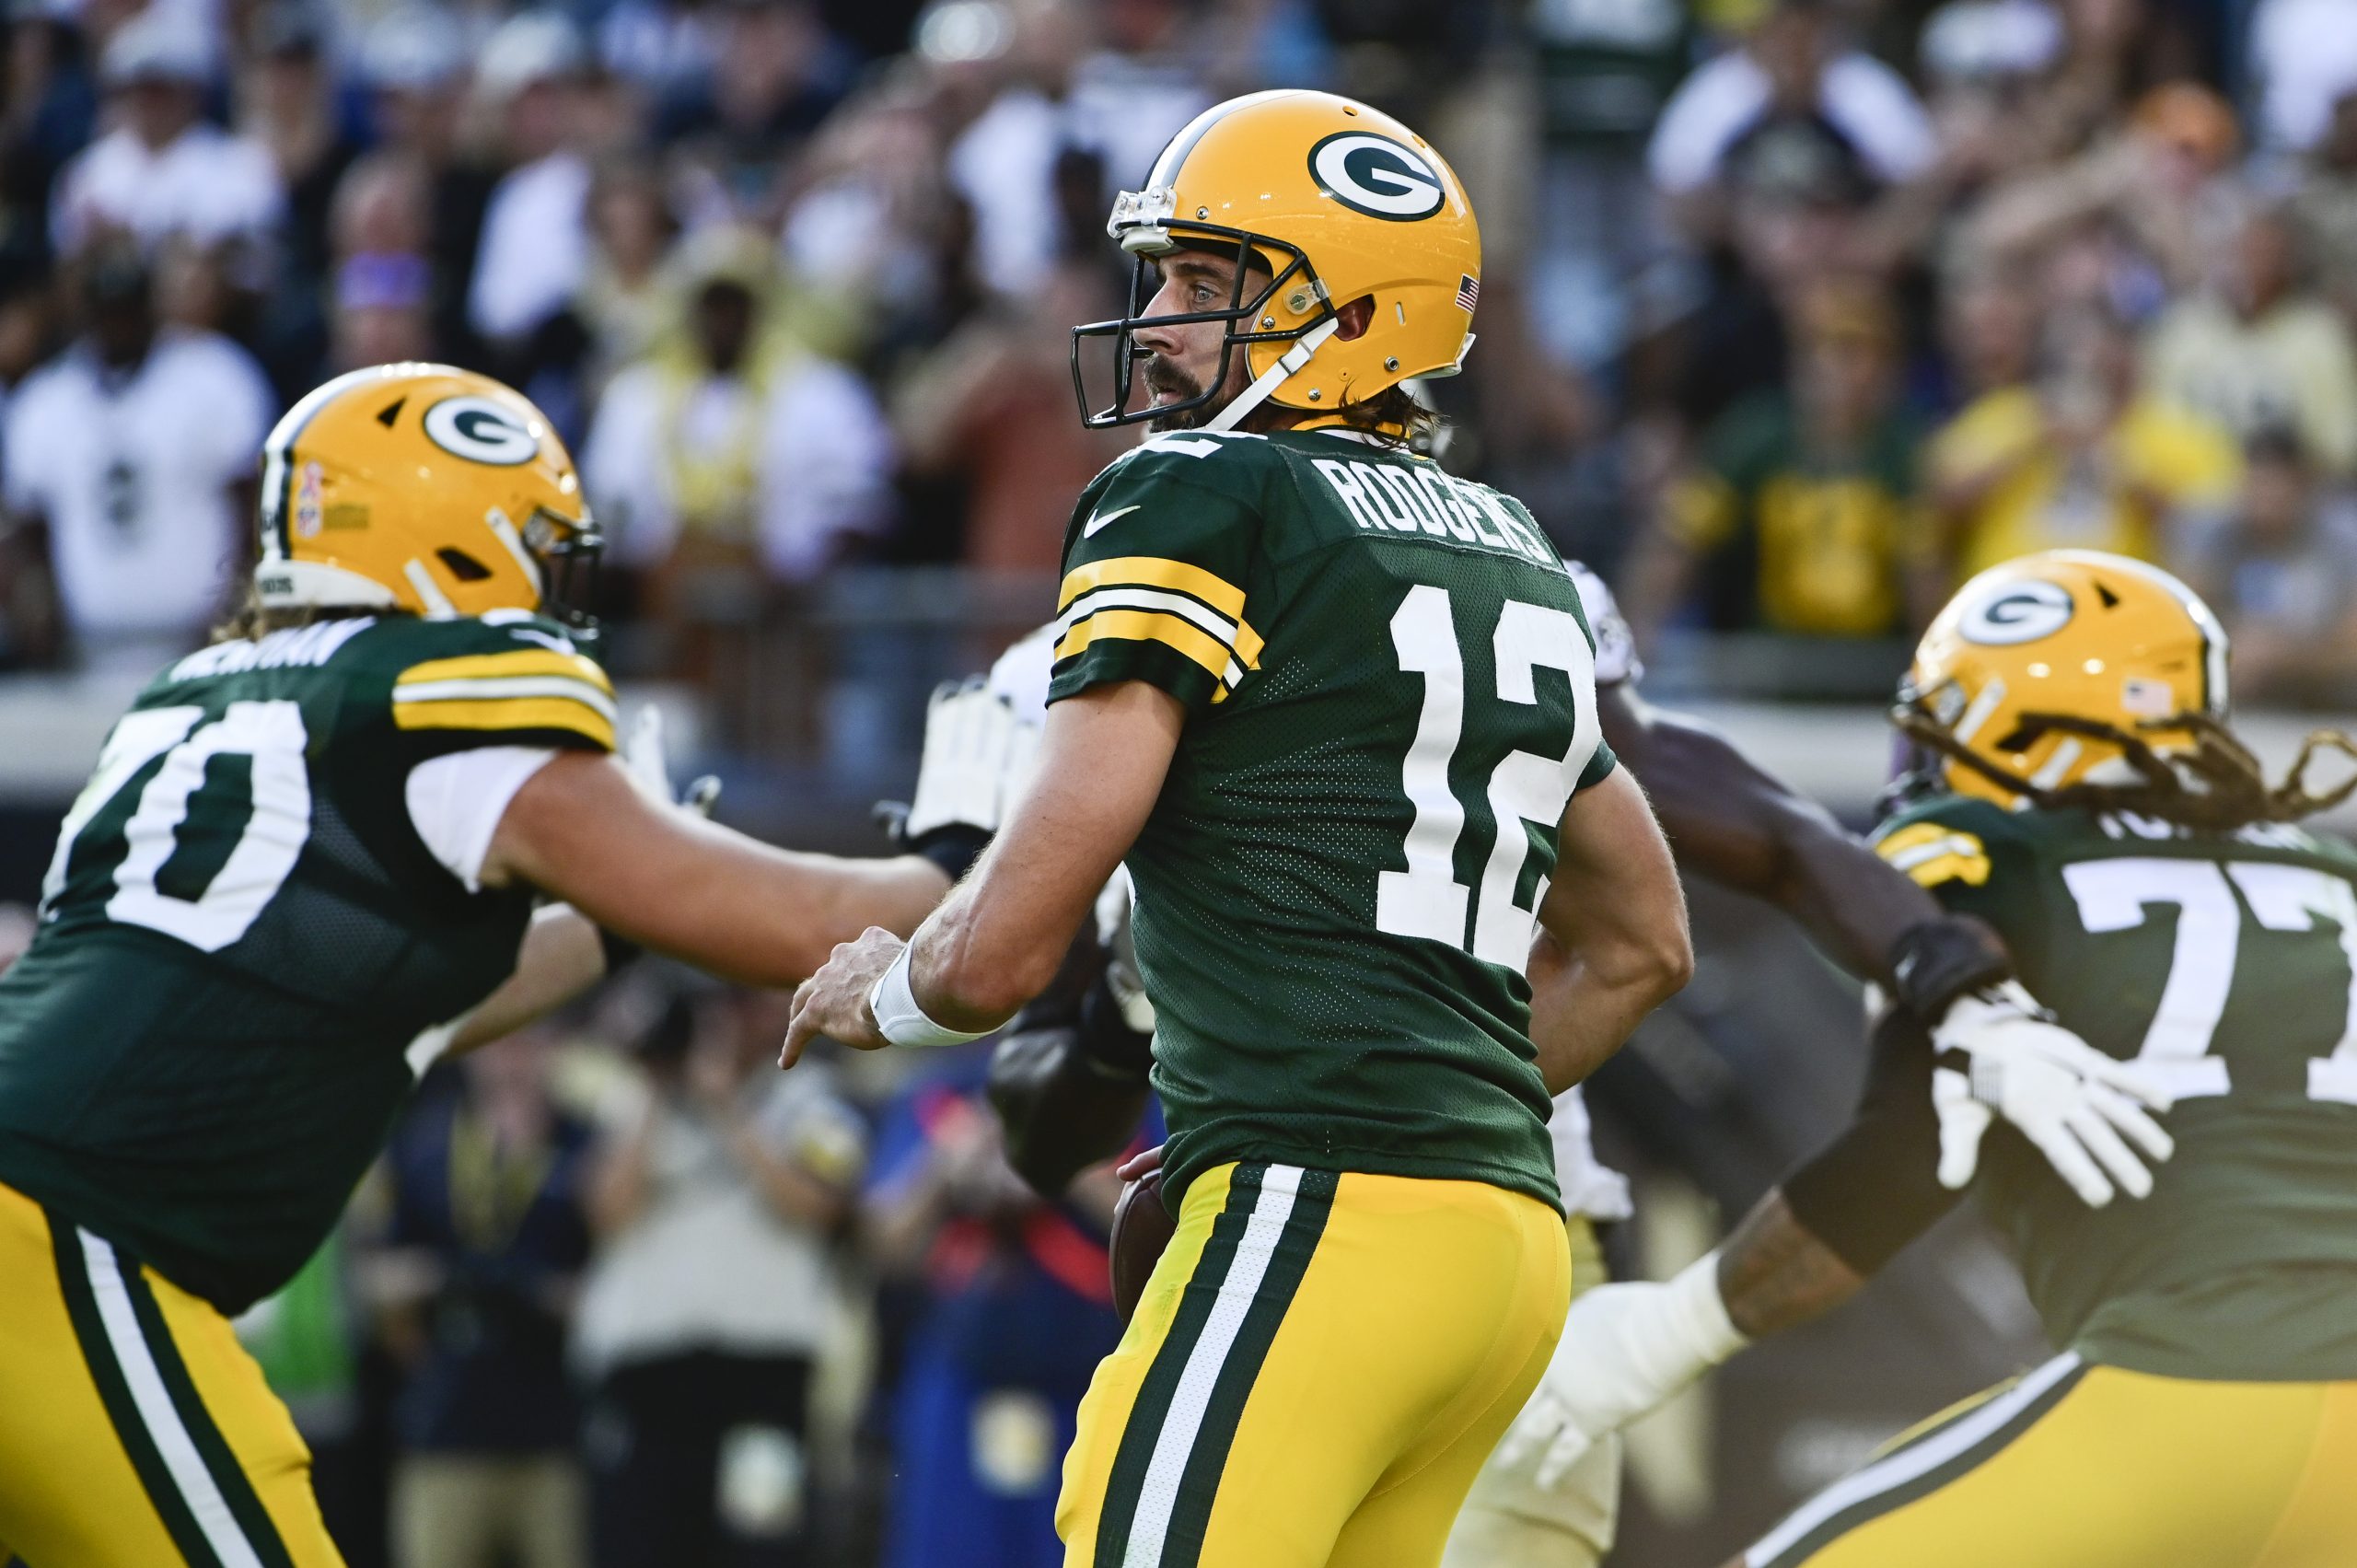 NFL: Green Bay Packers at New Orleans Saints